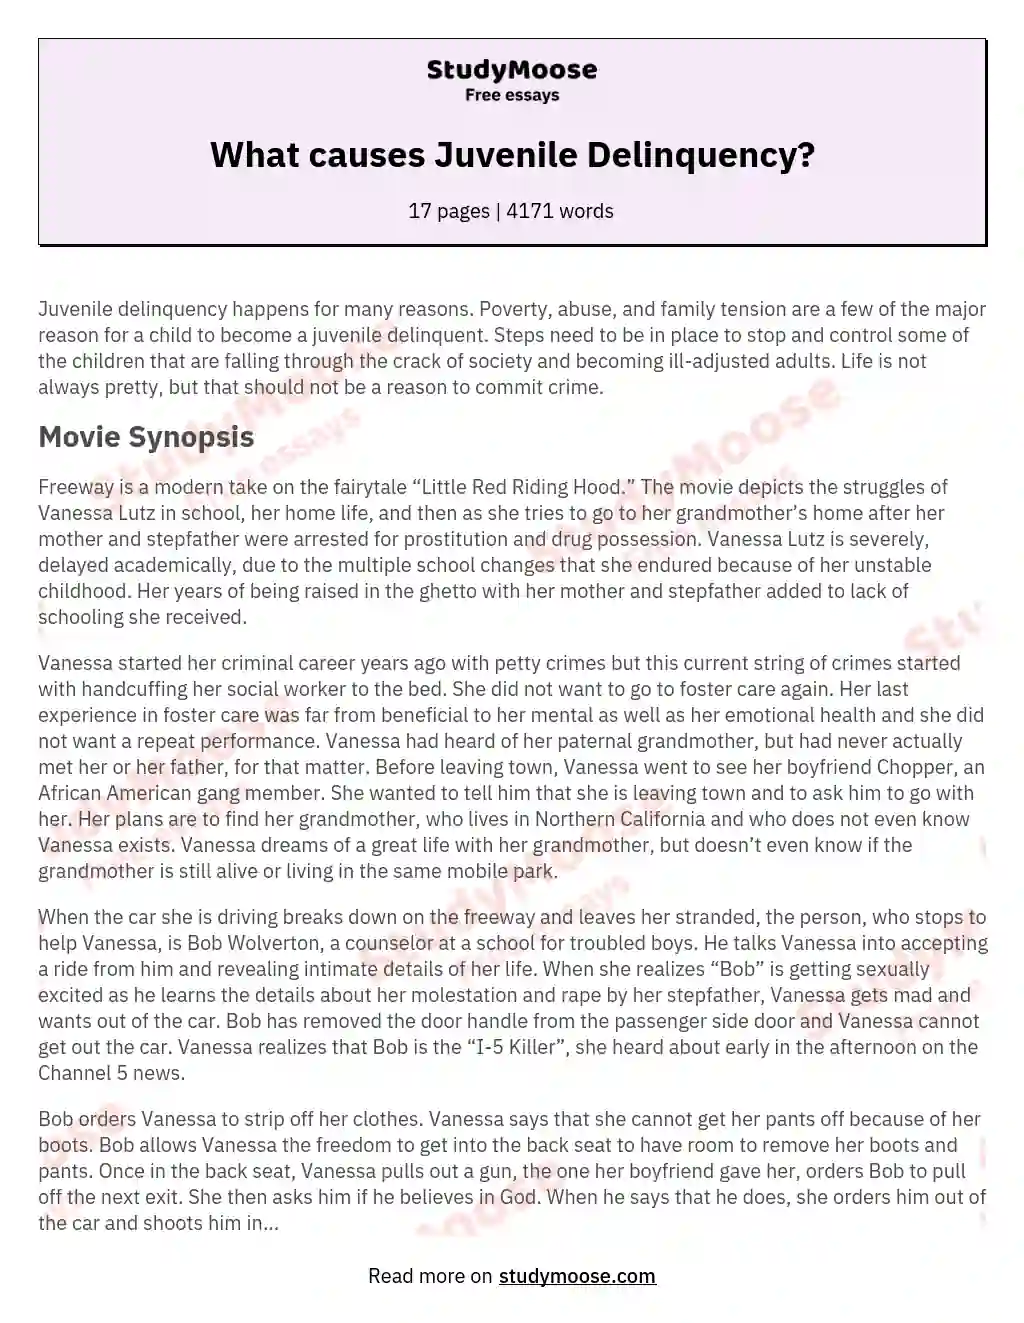 What causes Juvenile Delinquency? essay